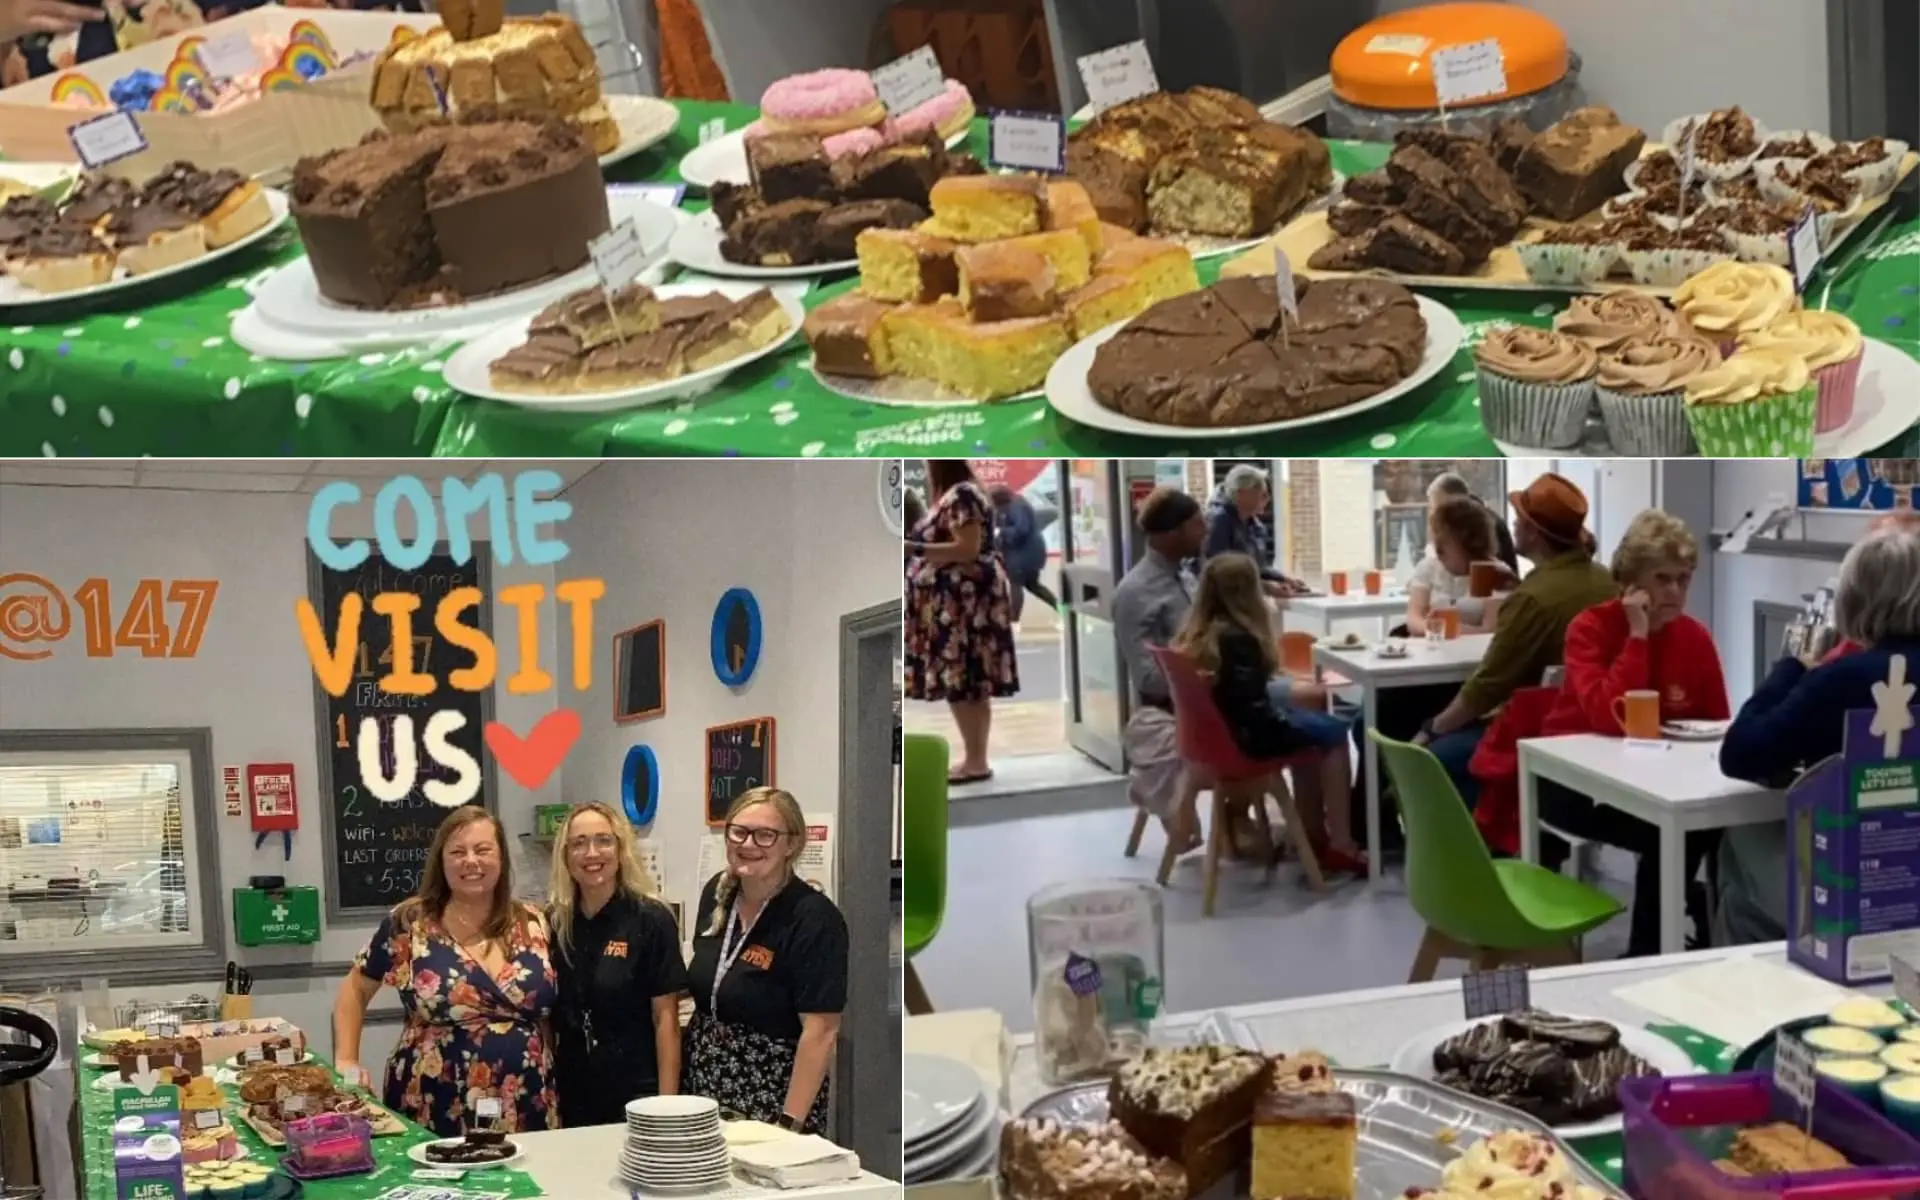 Photos of cakes for sale, plus Bex, Jo and Maiya at the busy coffee morning